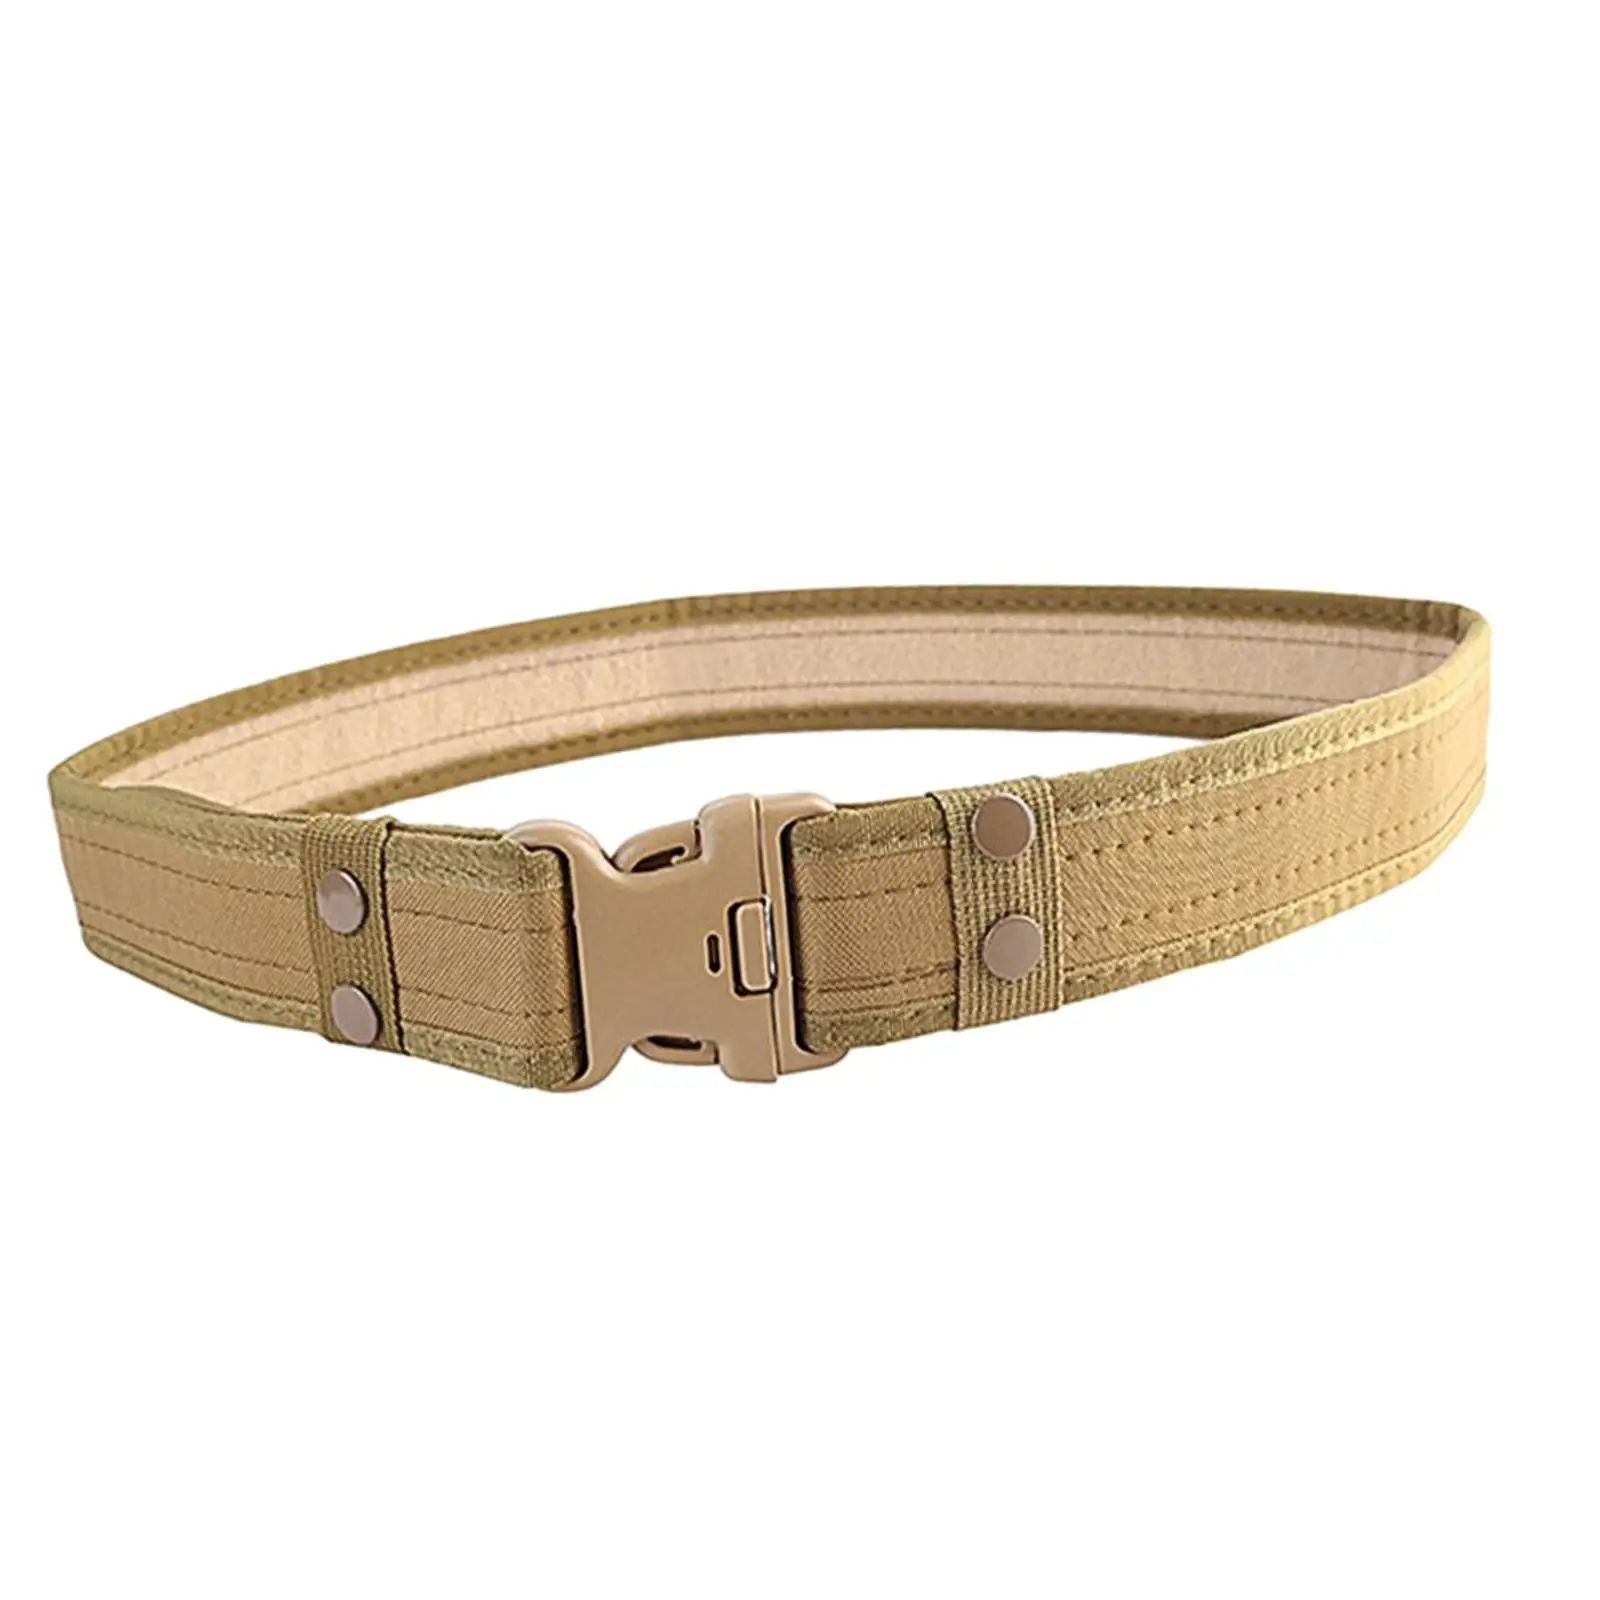 Men`s Outdoor Belts Clothing Accessories Load Bearing Waist Belts with Heavy Duty Quick Release Buckle for Camping Hunting Game